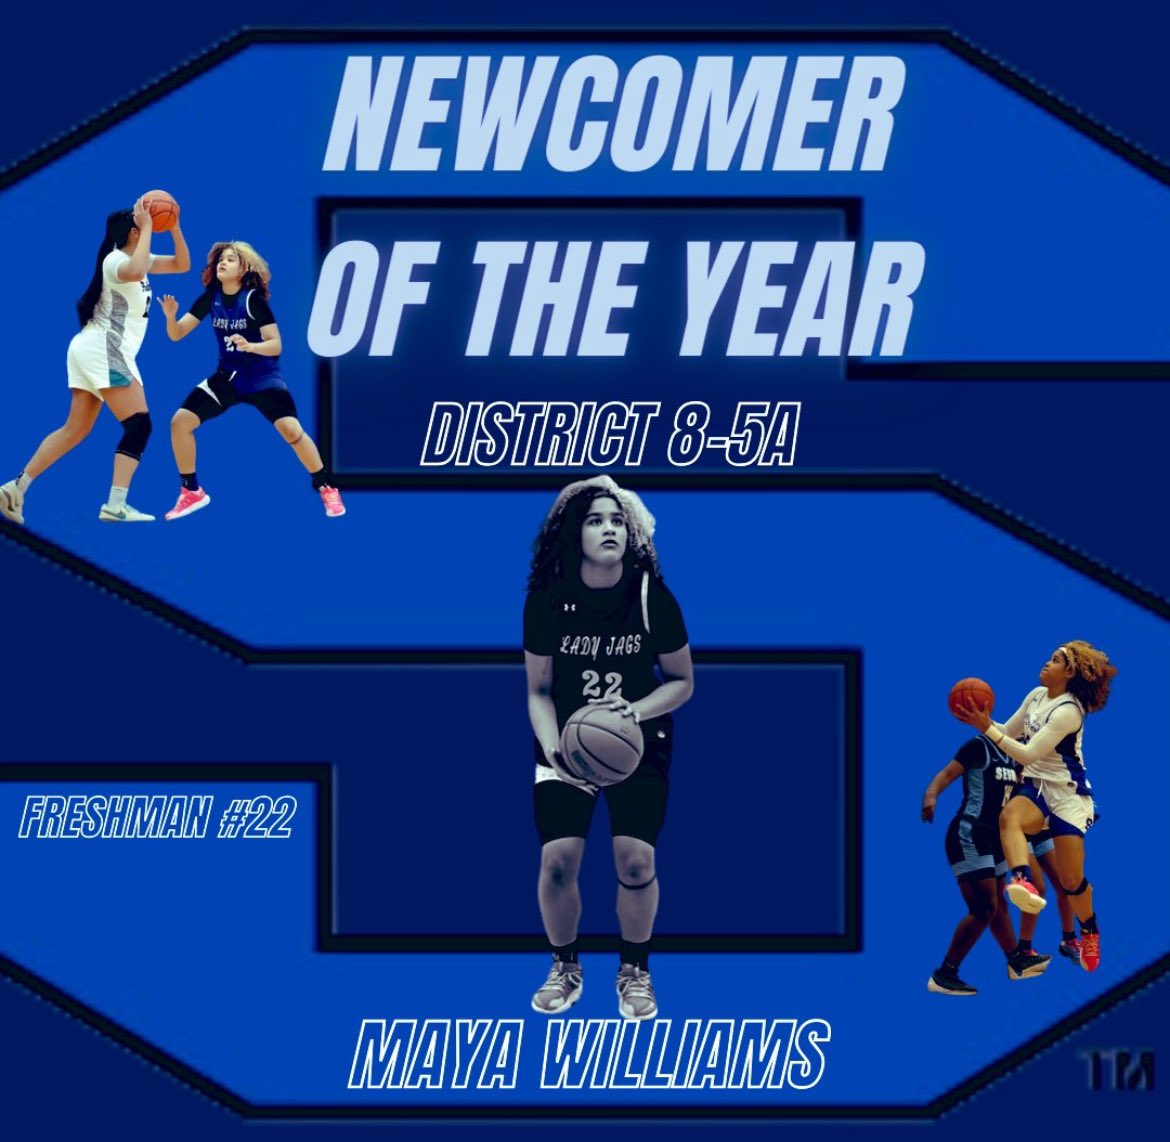 blessed to receive newcomer of the year